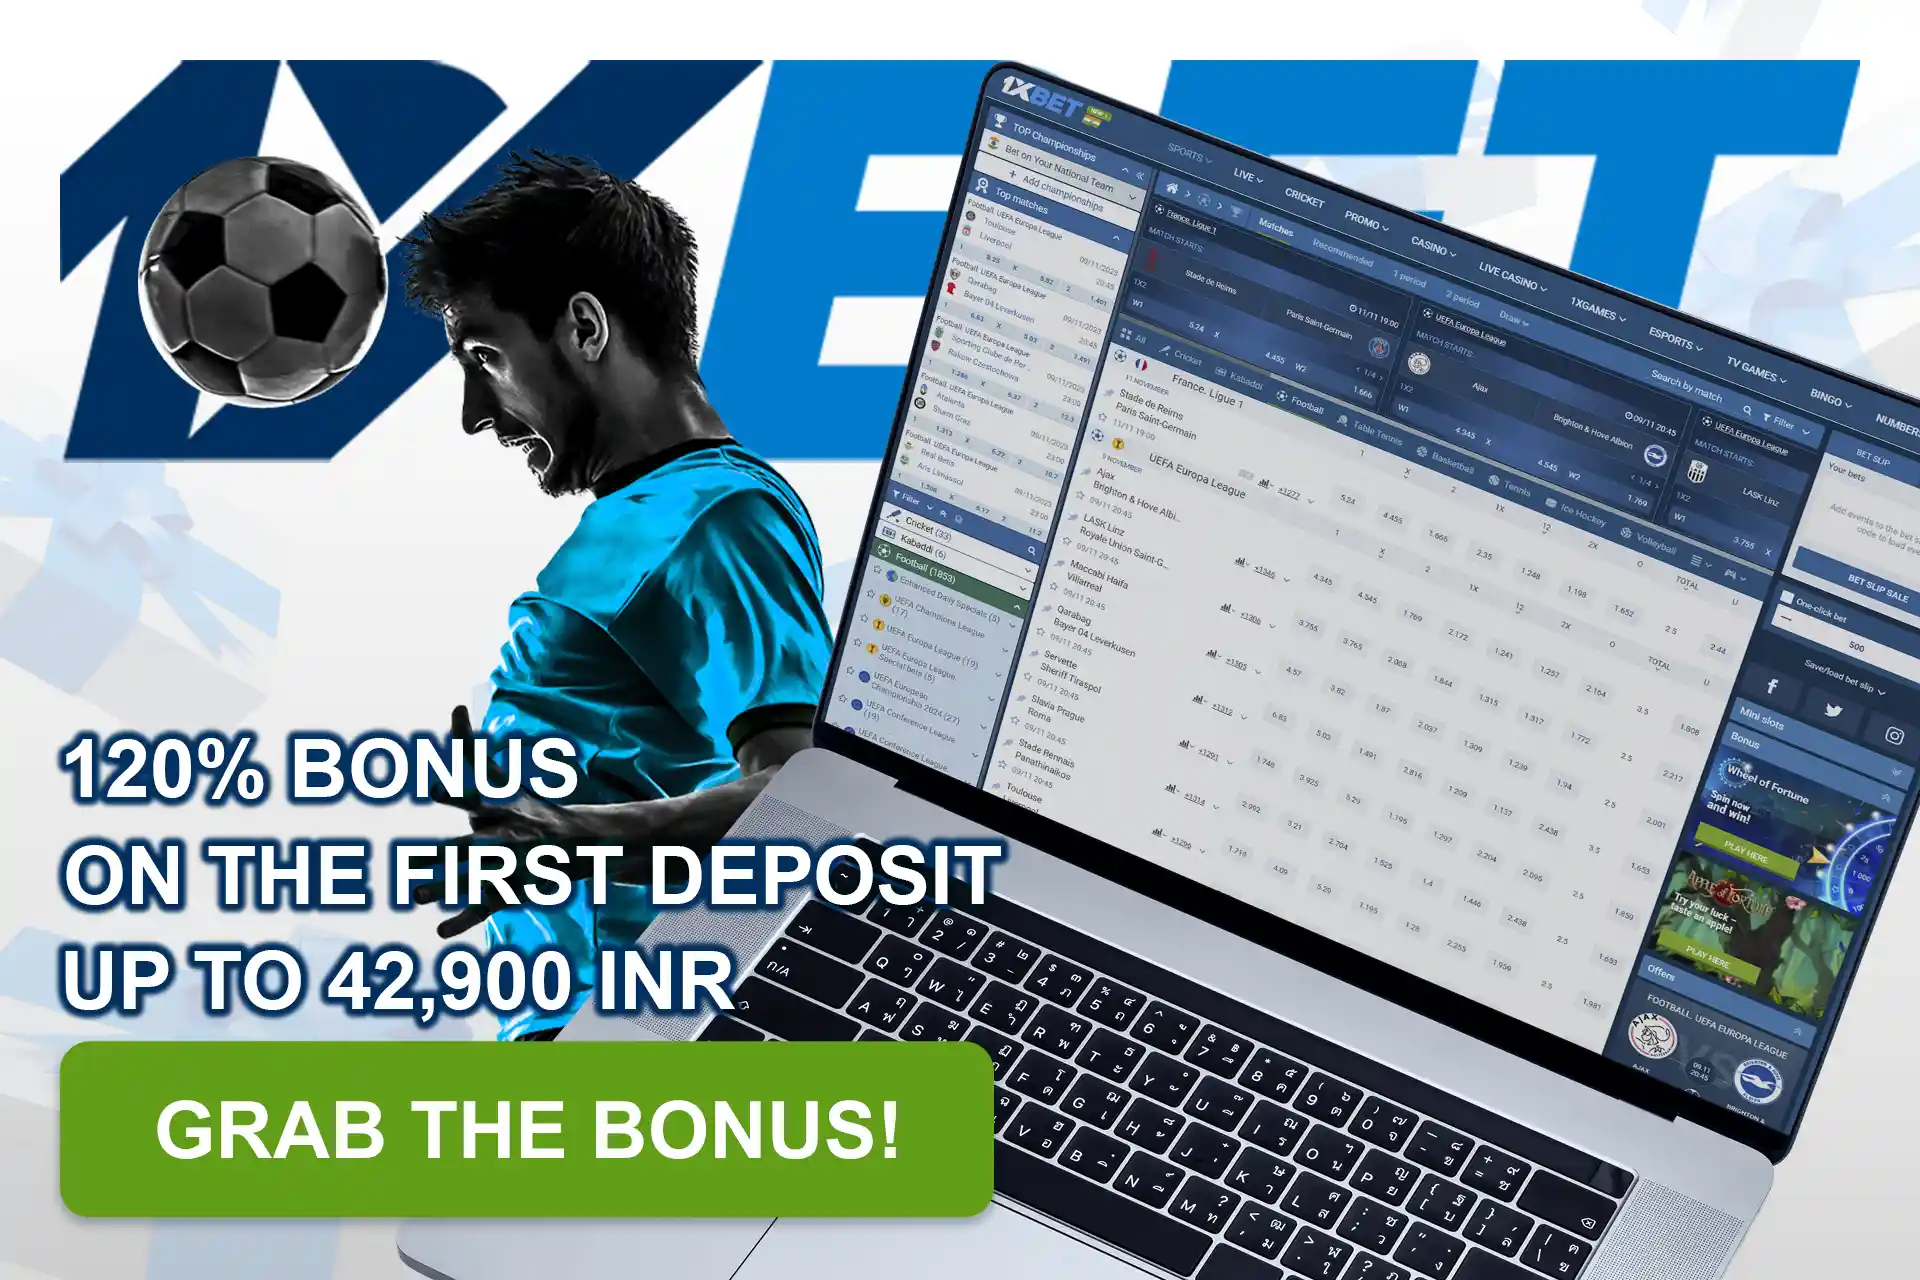 For sports betting, you can get a generous welcome bonus after creating an account on 1xBet.